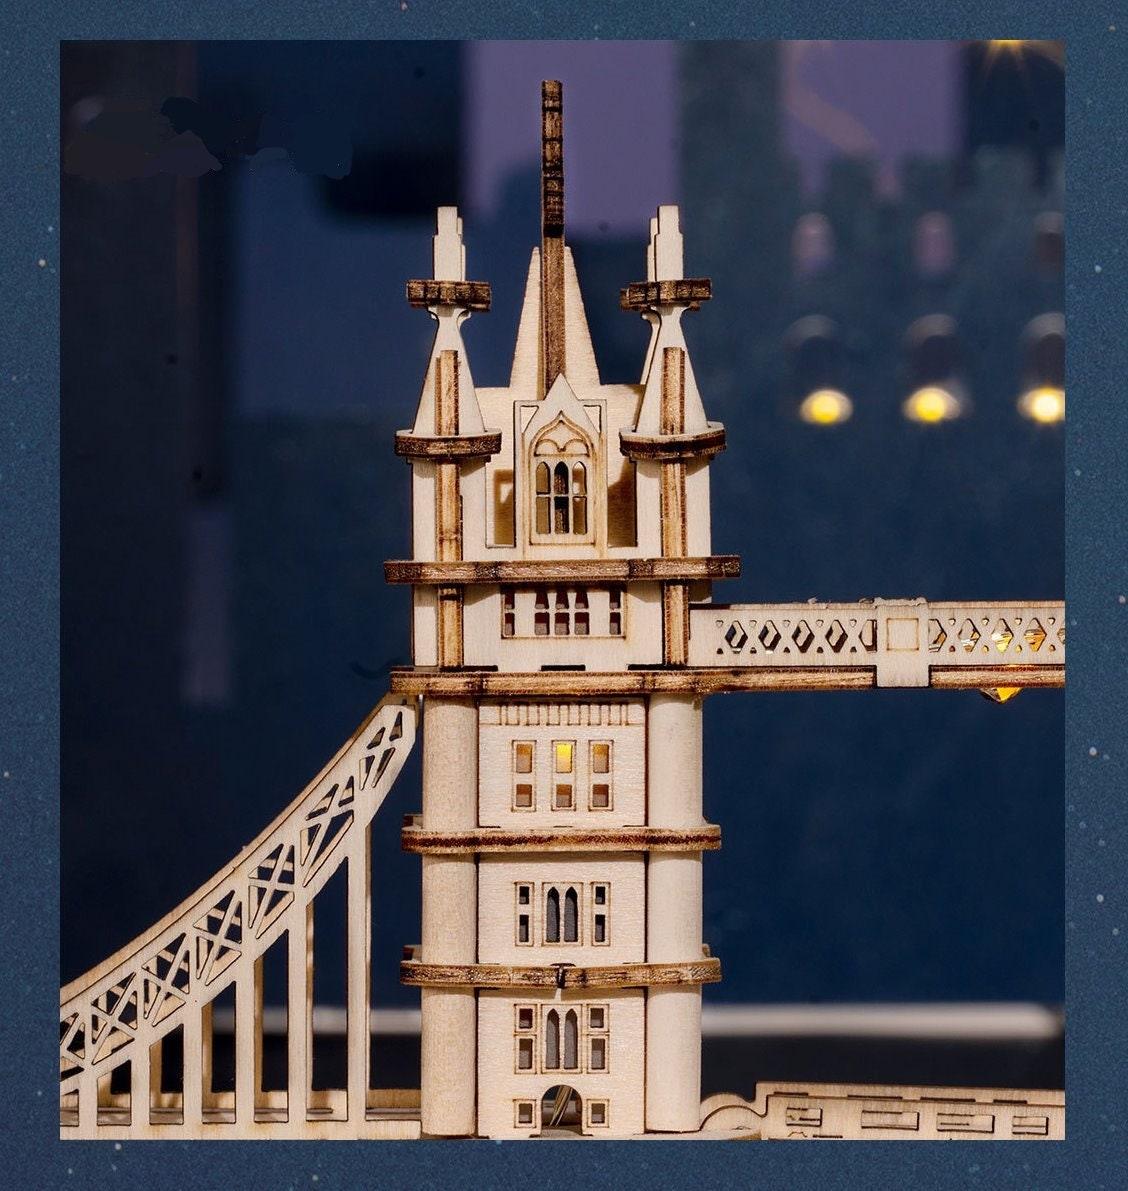 DIY 3D Wooden Puzzle - Big Ben London - Tower Bridge London Miniature Wooden Puzzles - London Bridge & Tower With LED - Wooden Building Kit - Rajbharti Crafts